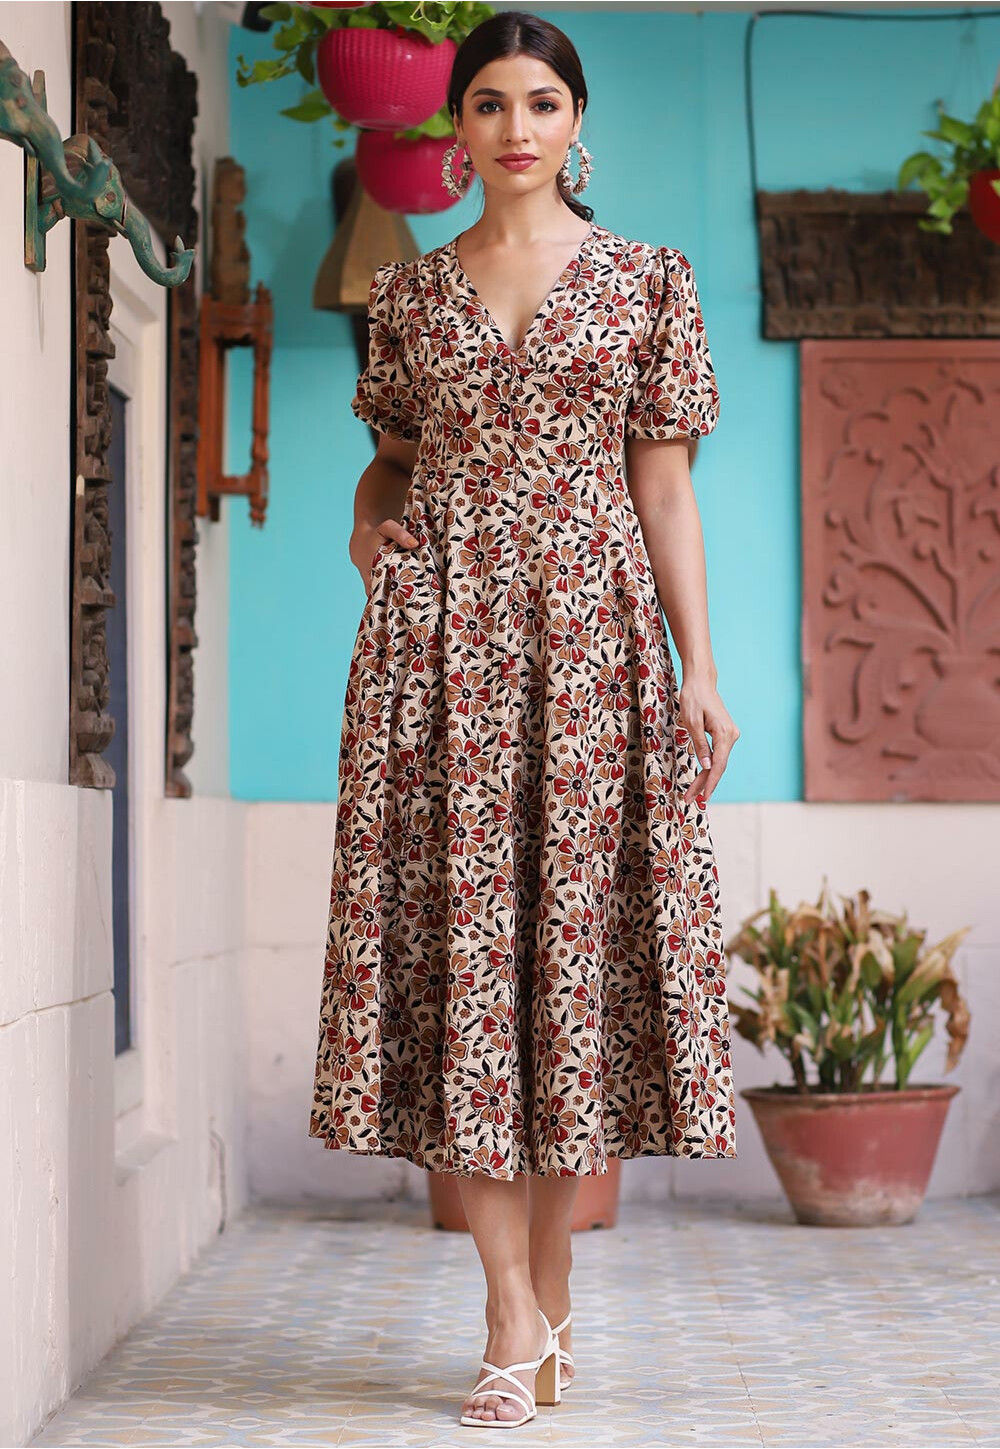 Cotton dress with print